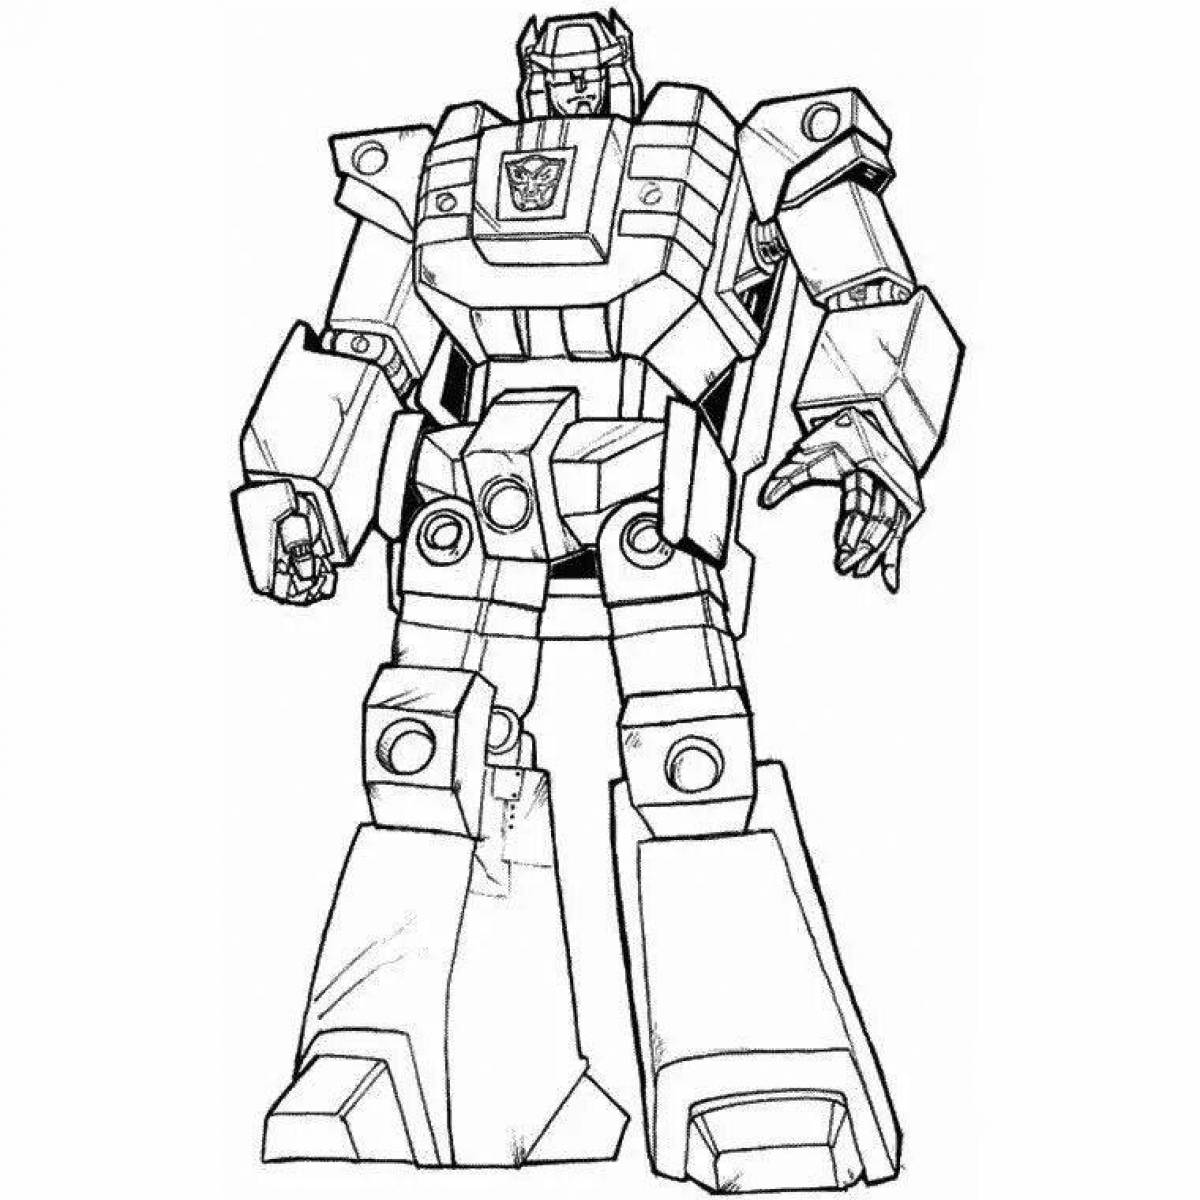 Coloring page exquisite police robot